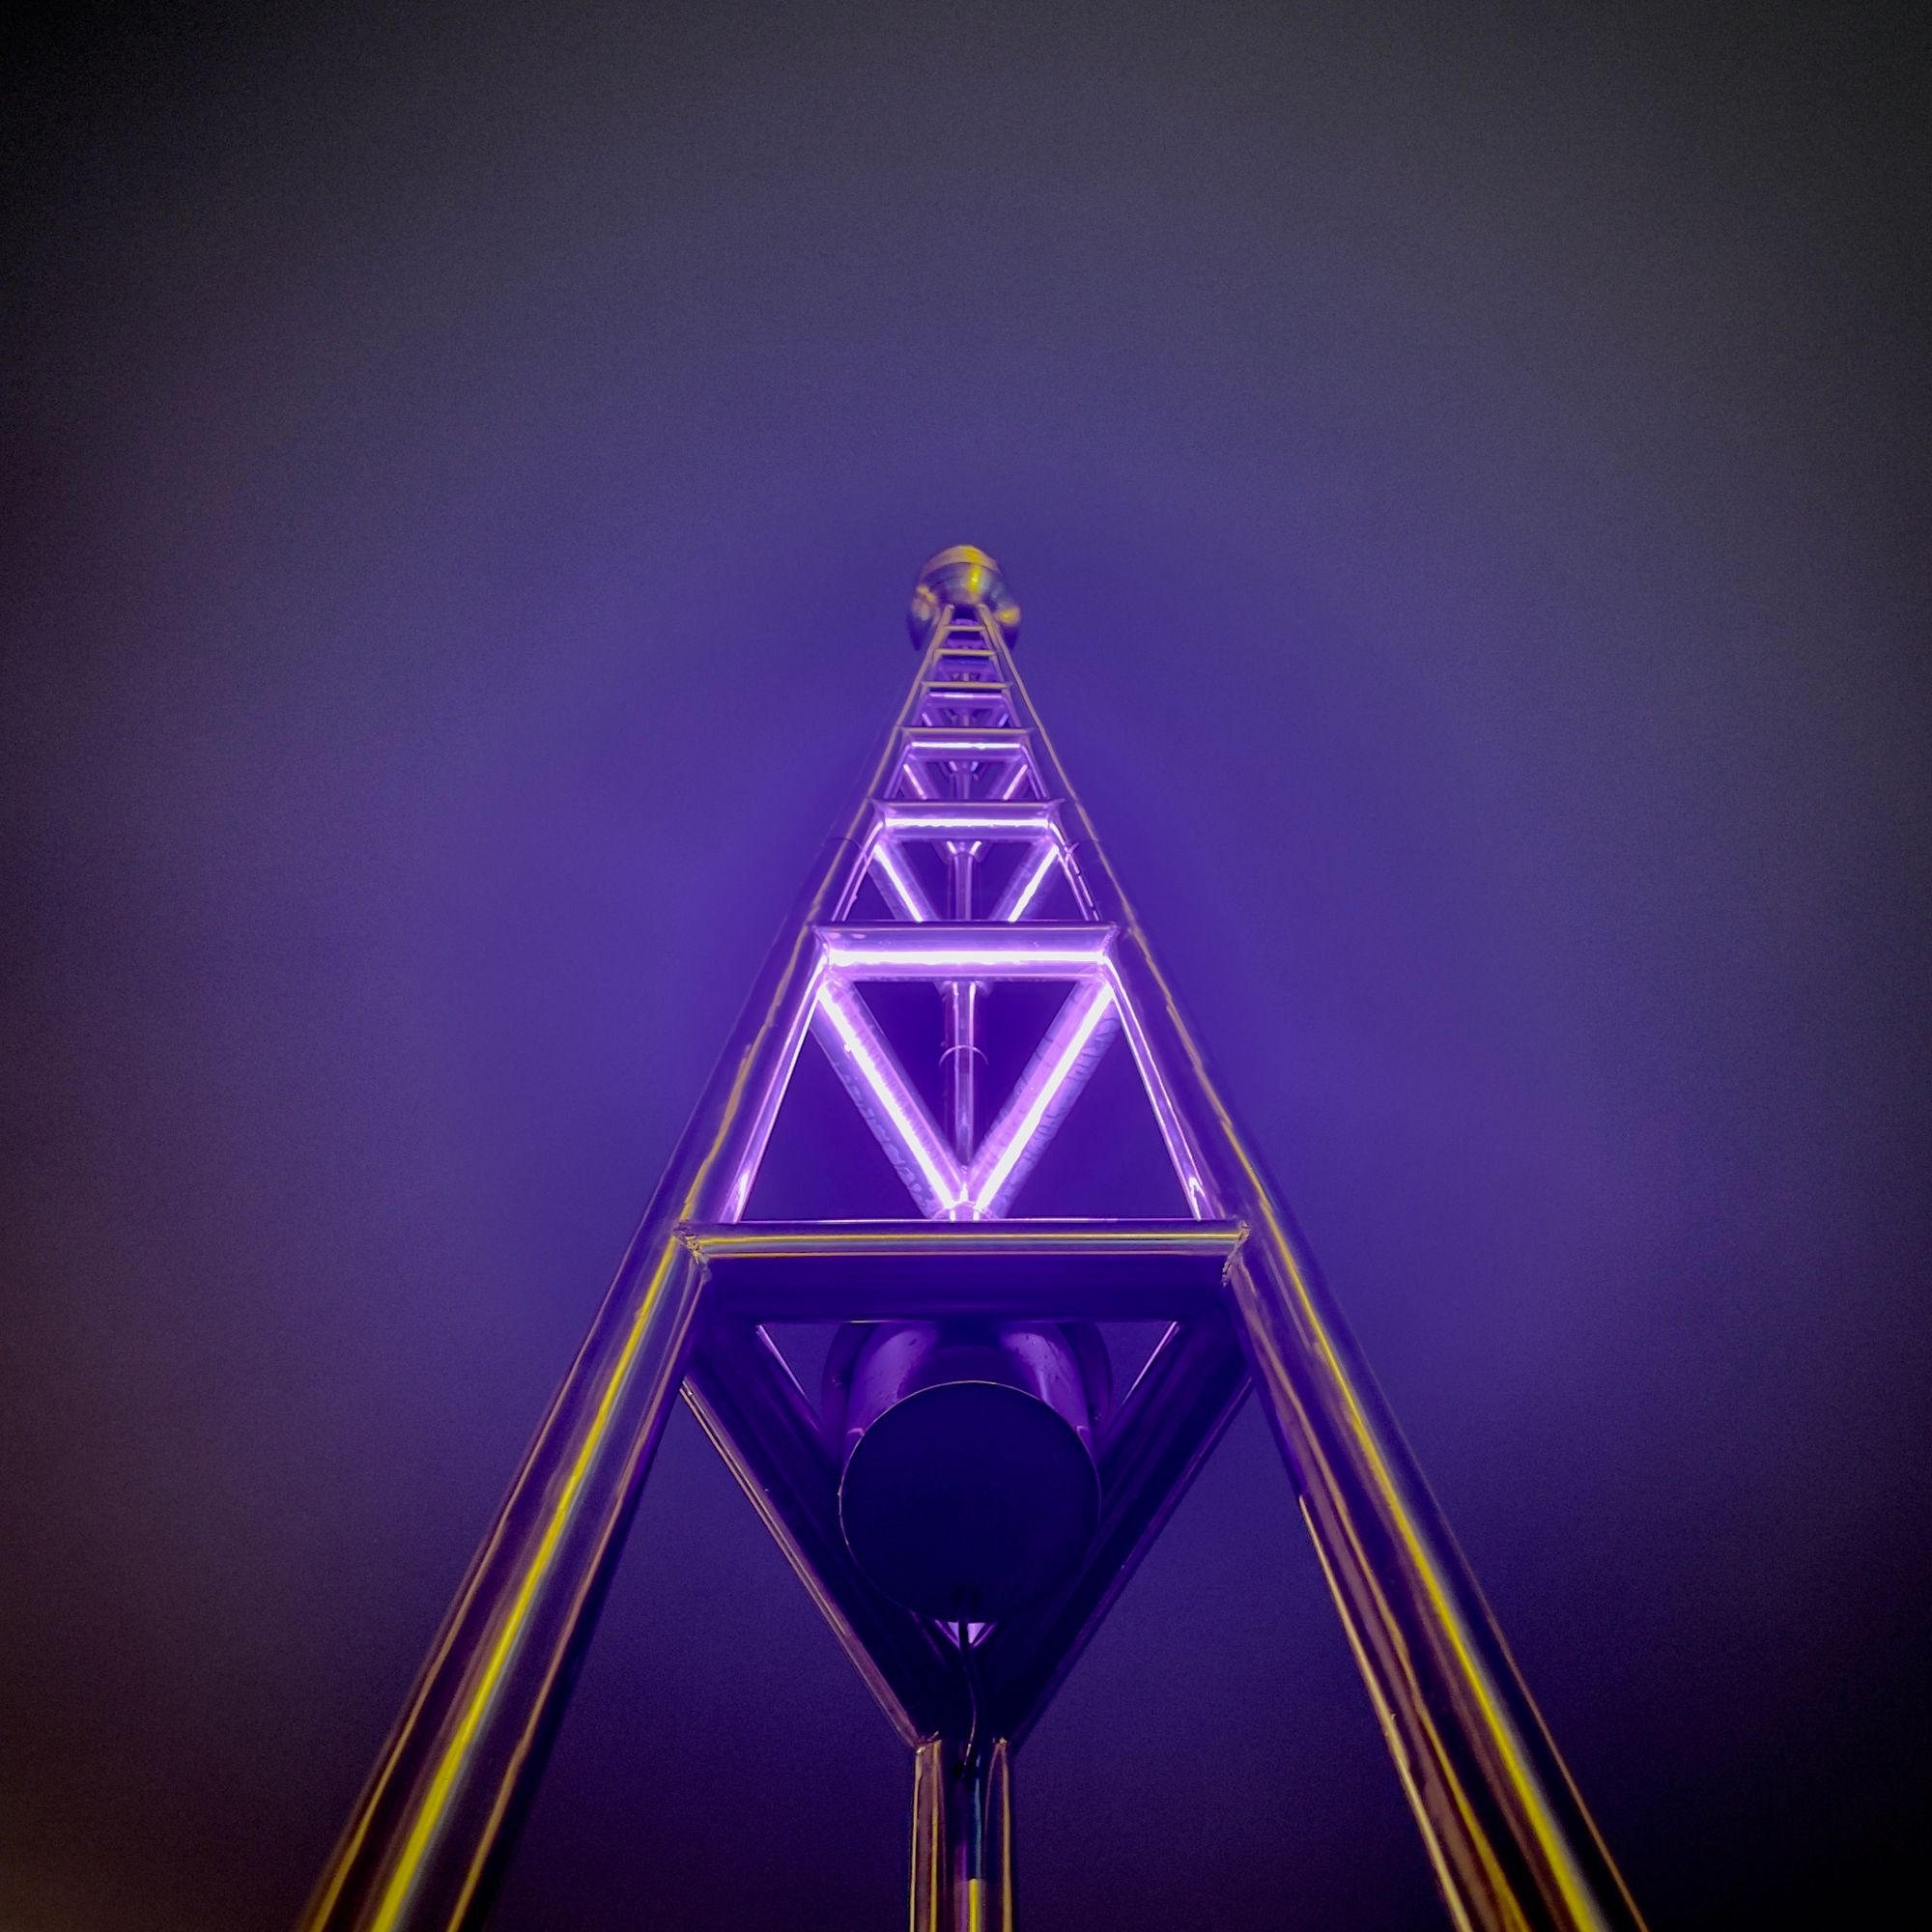 Looking up at a triangular transmitter tower made of shiny metal tubing, with bluish purple tube lights in a triangle arrangement on the tiers.